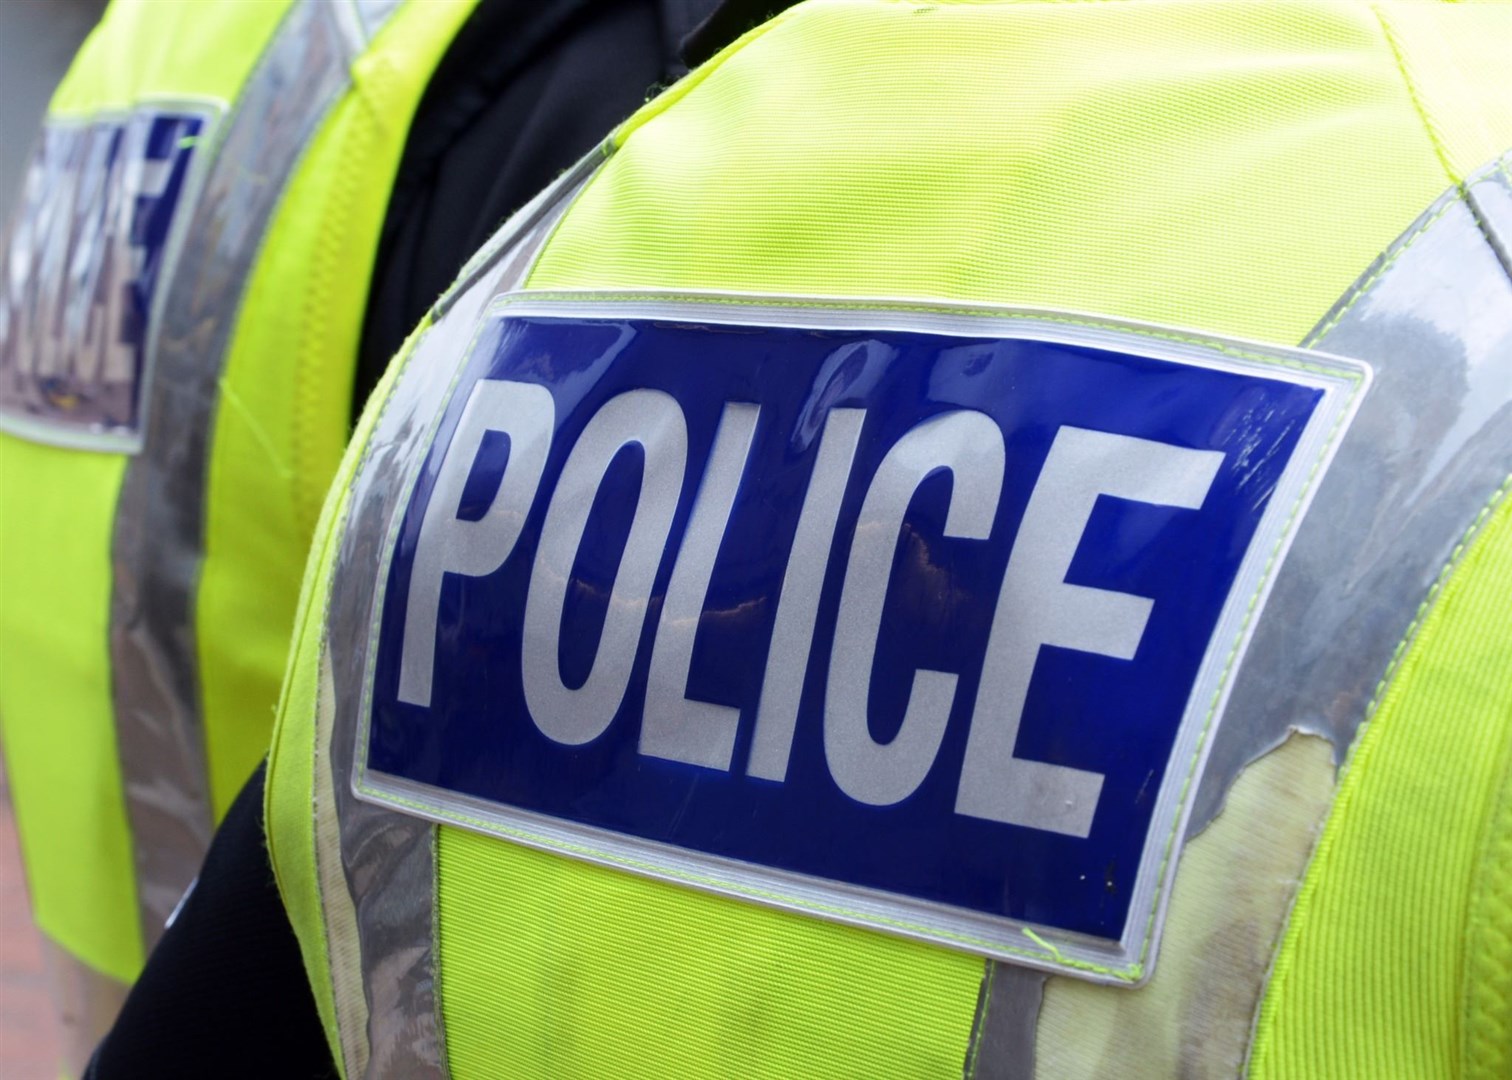 Police have gone to the scene of an overturned caravan on the A9 south of Inverness.